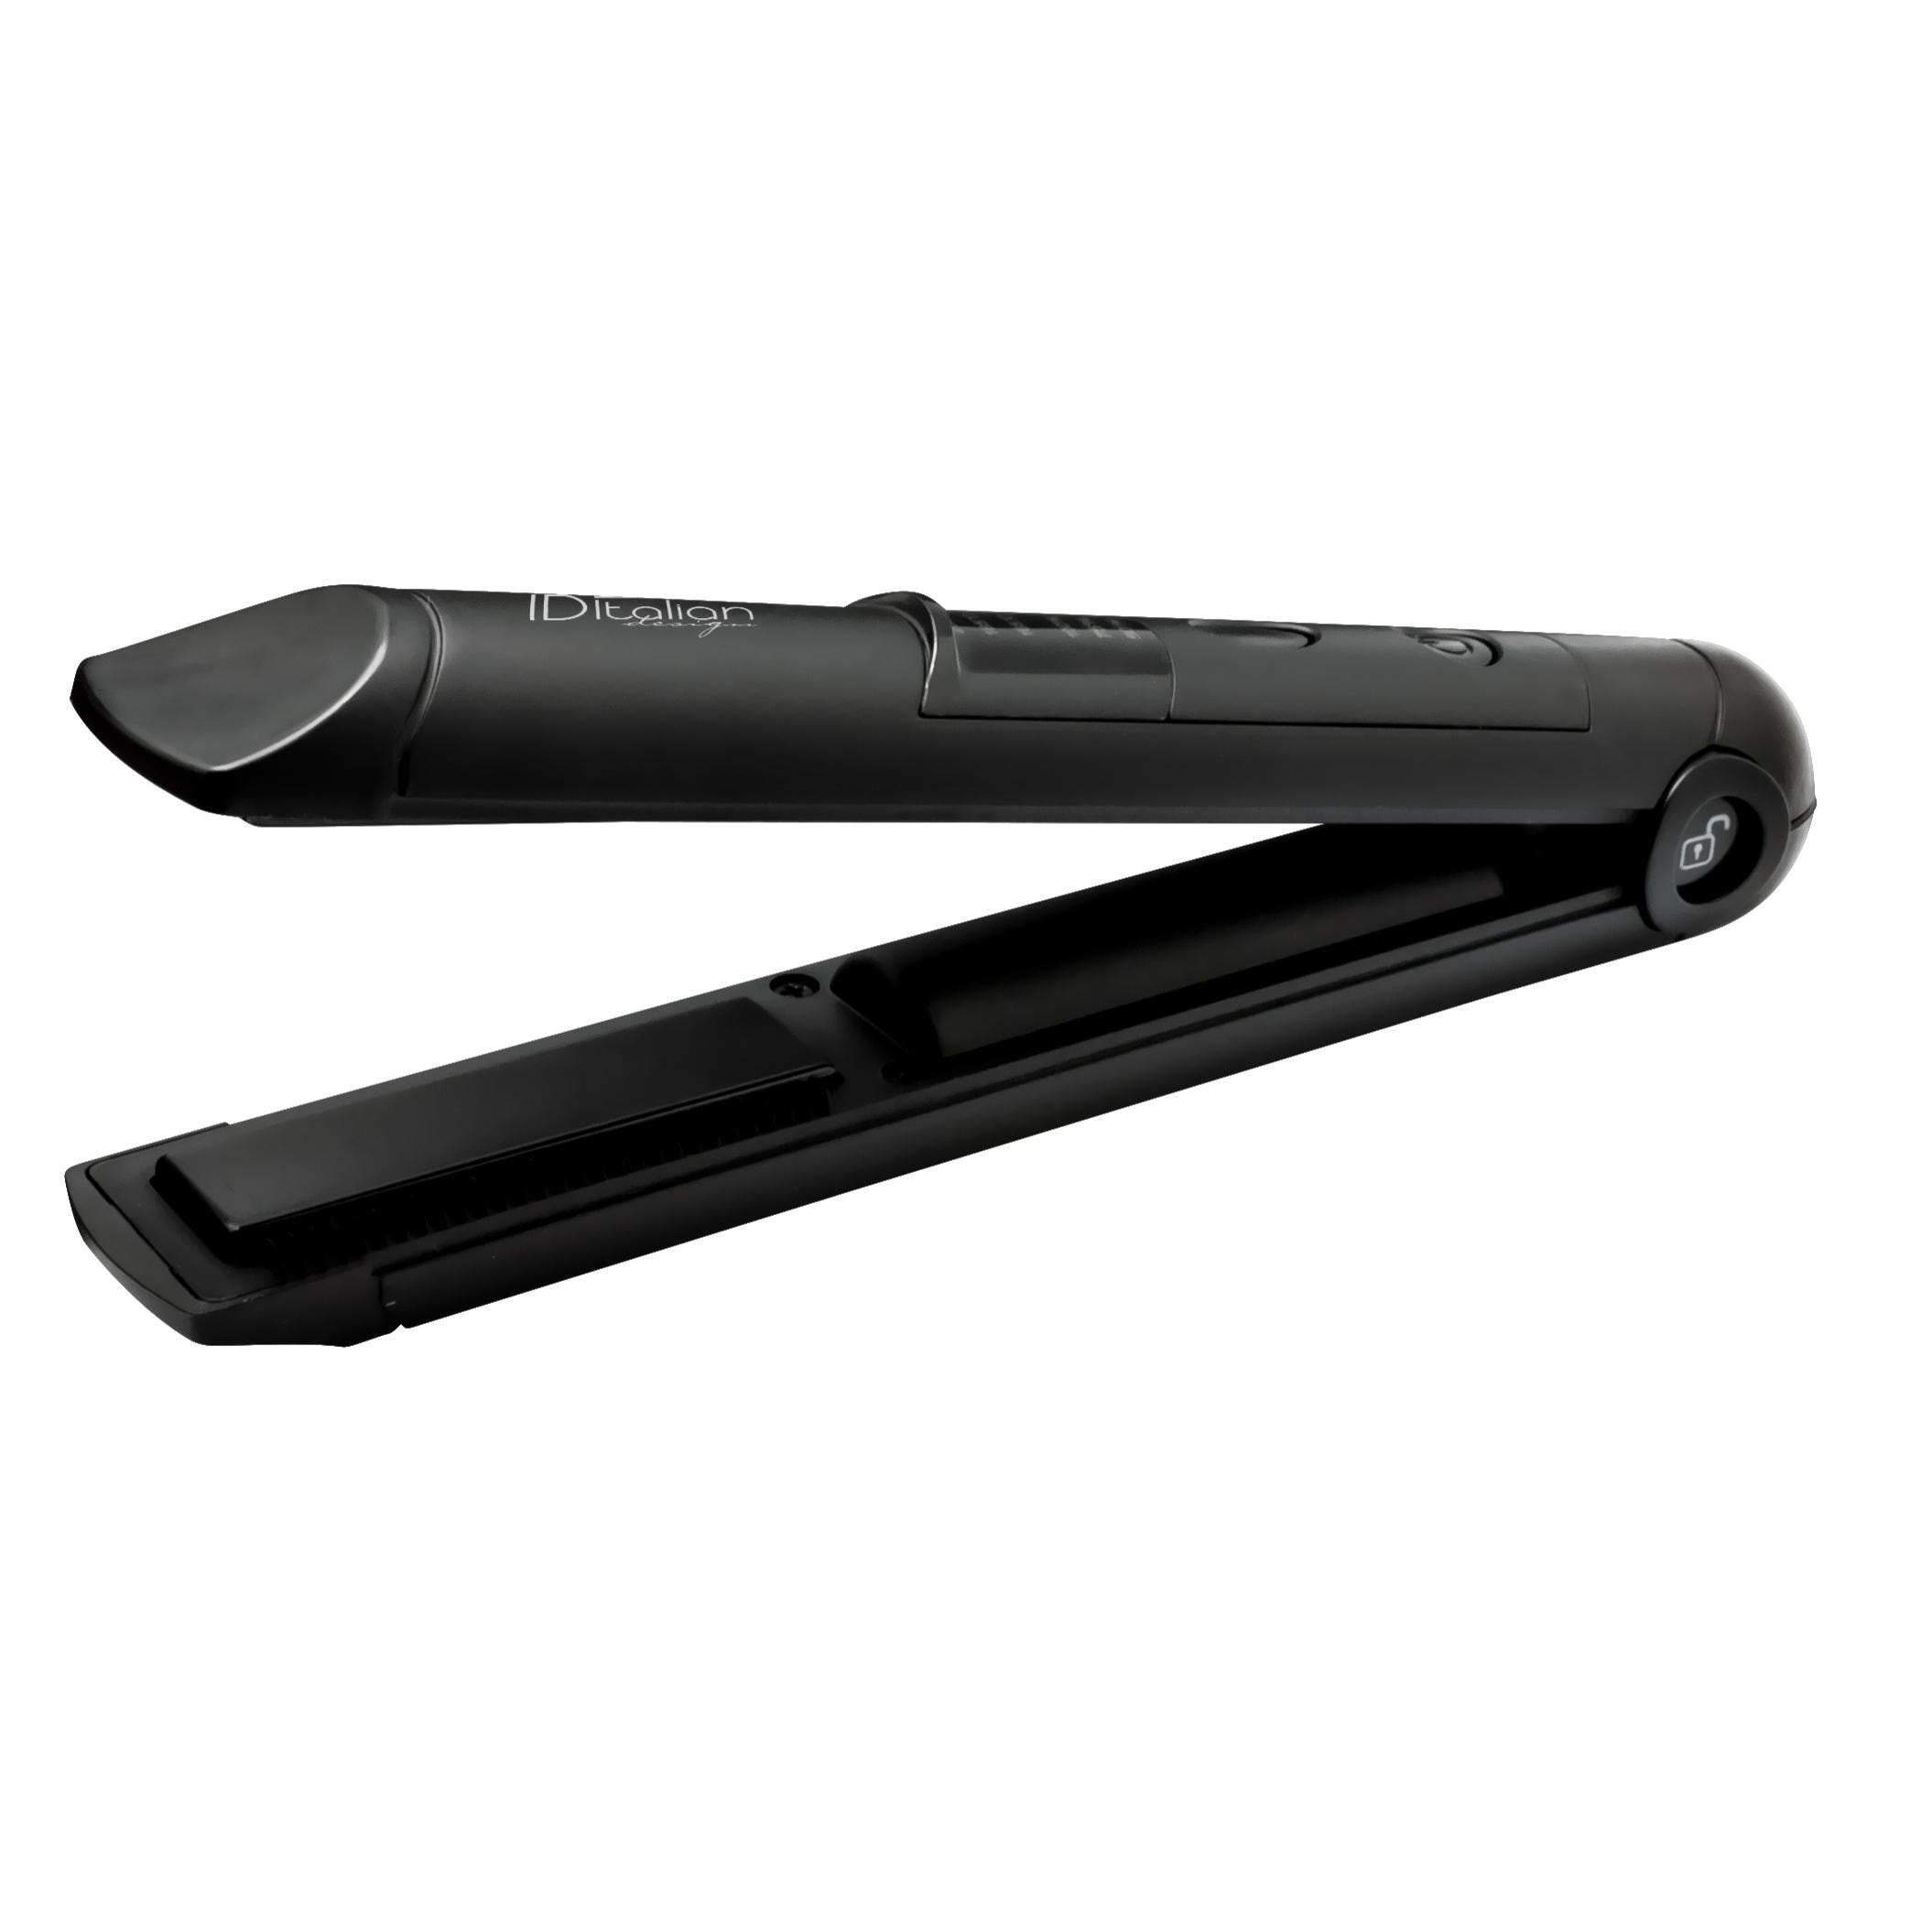 WIRELESS USB RECHARGEABLE HAIR STRAIGHTENER